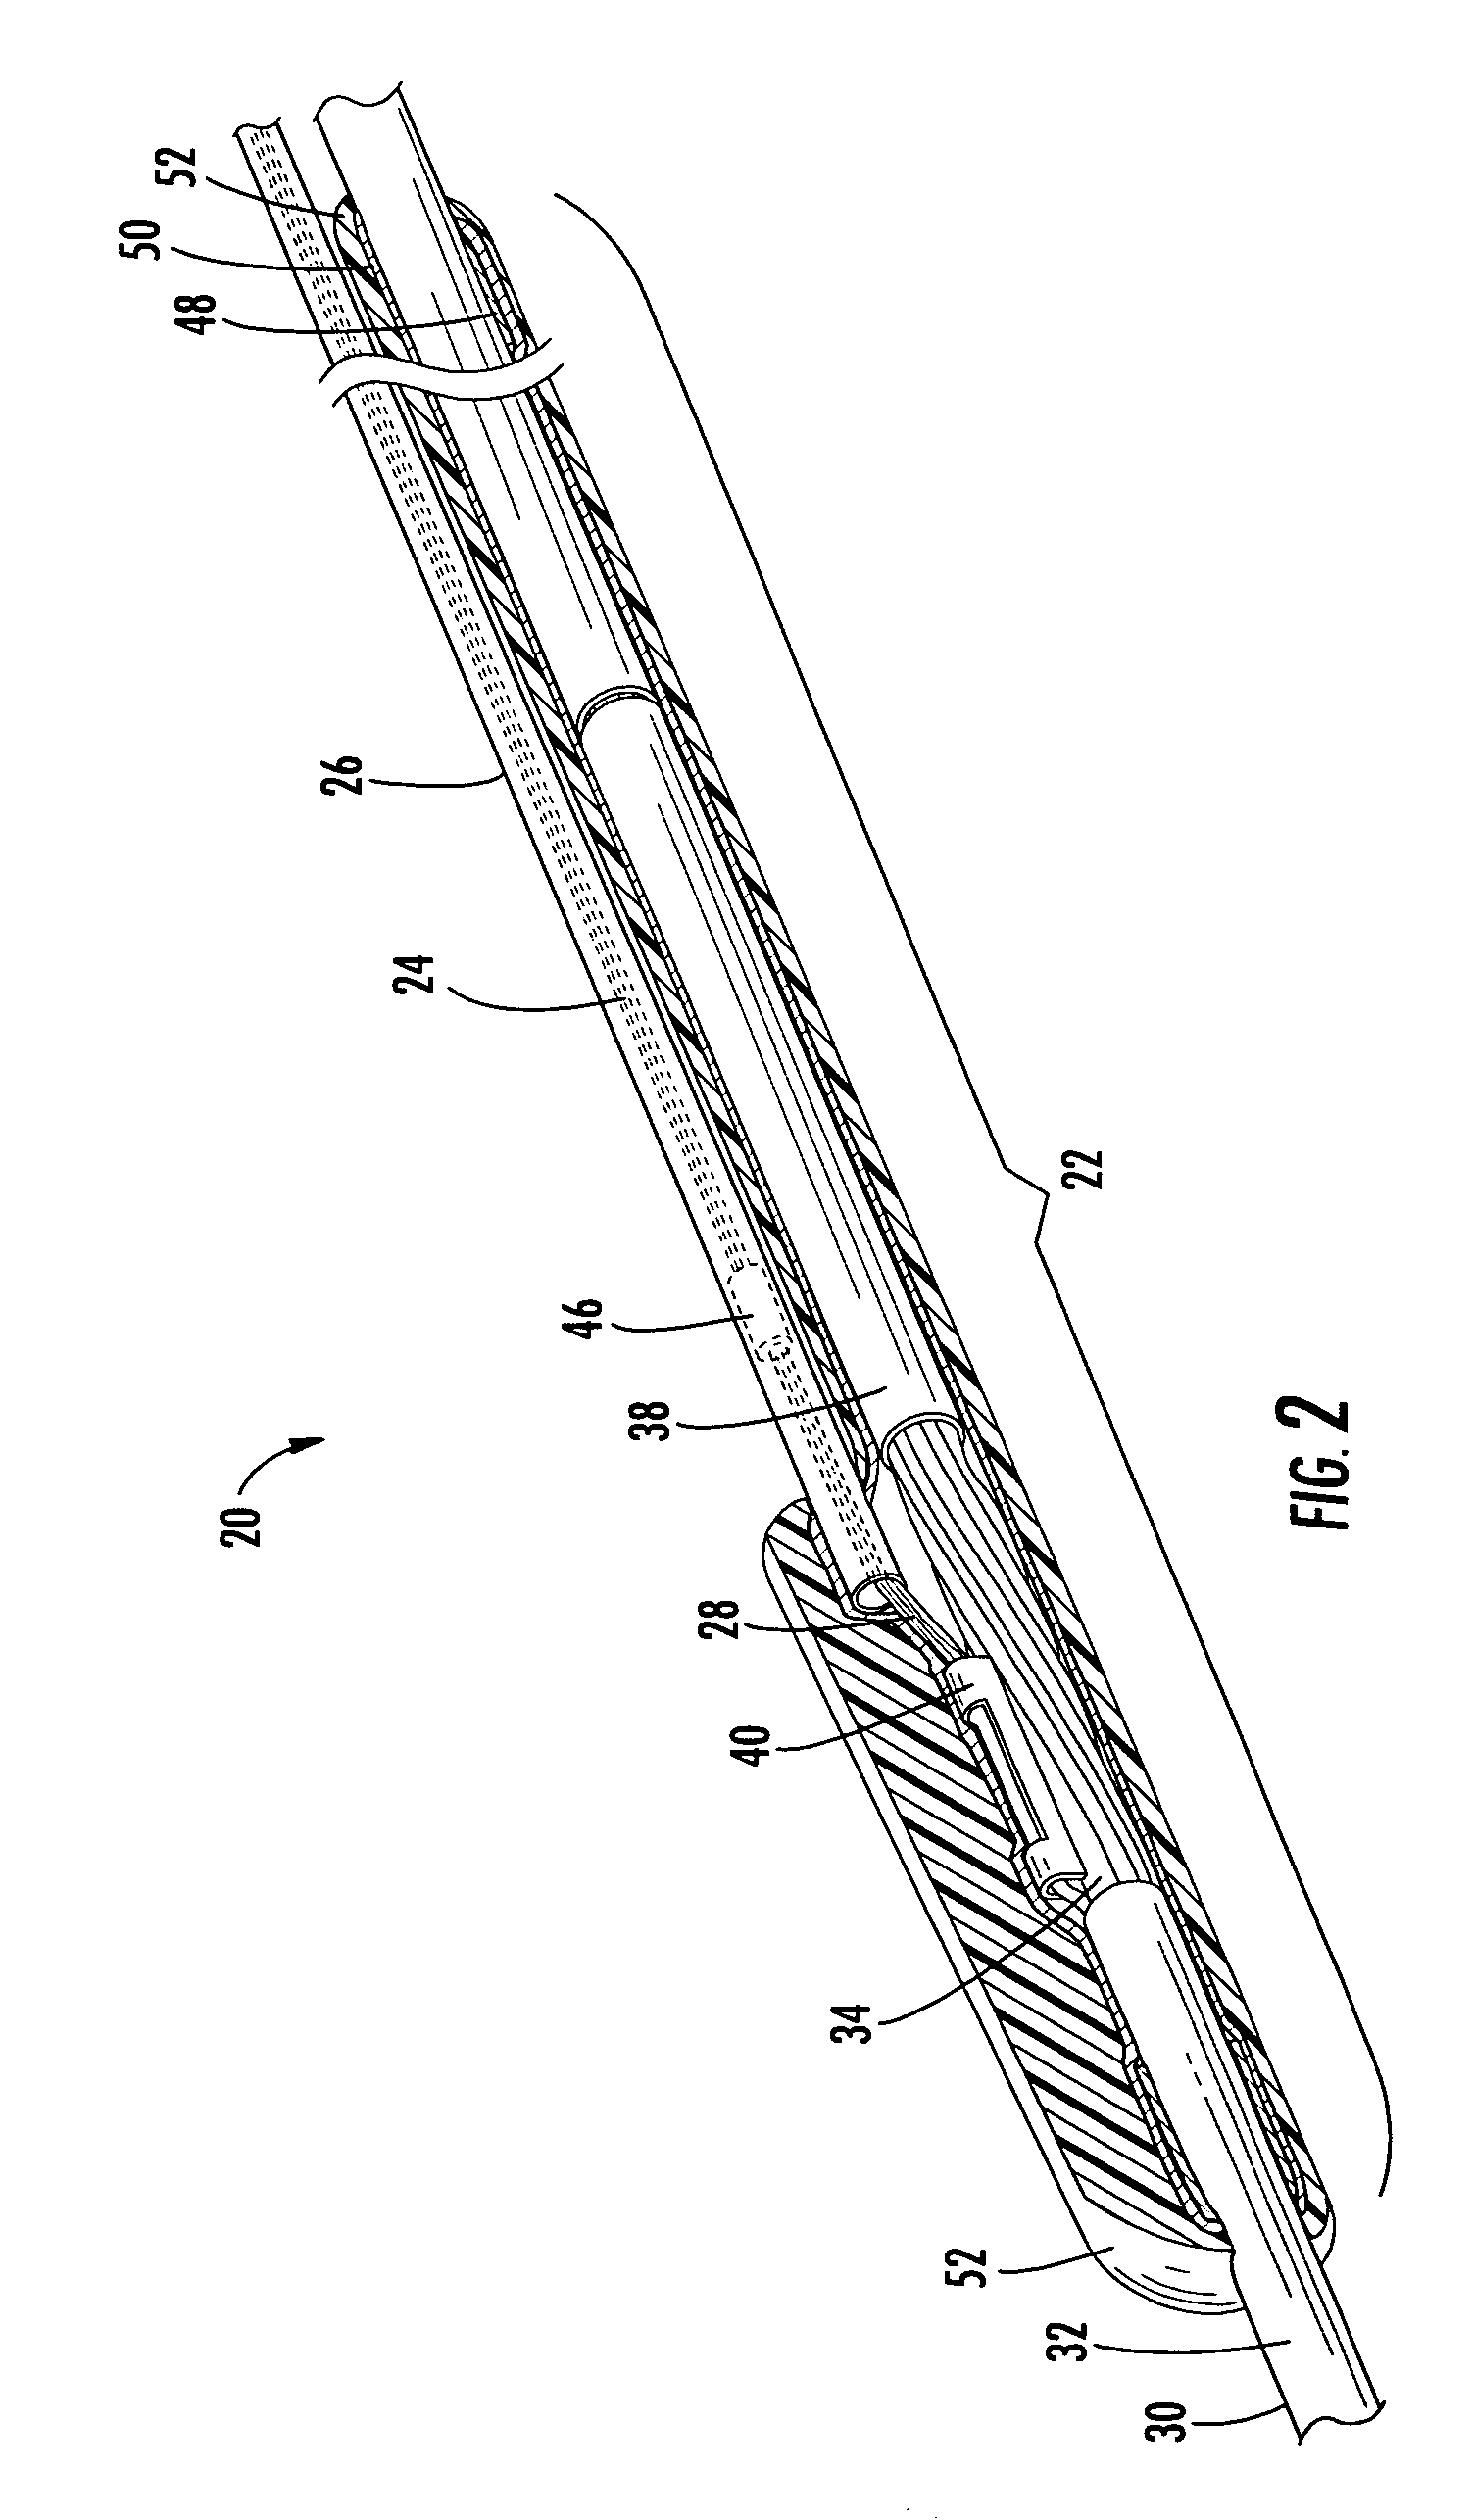 Distribution cable assembly having overmolded mid-span access location